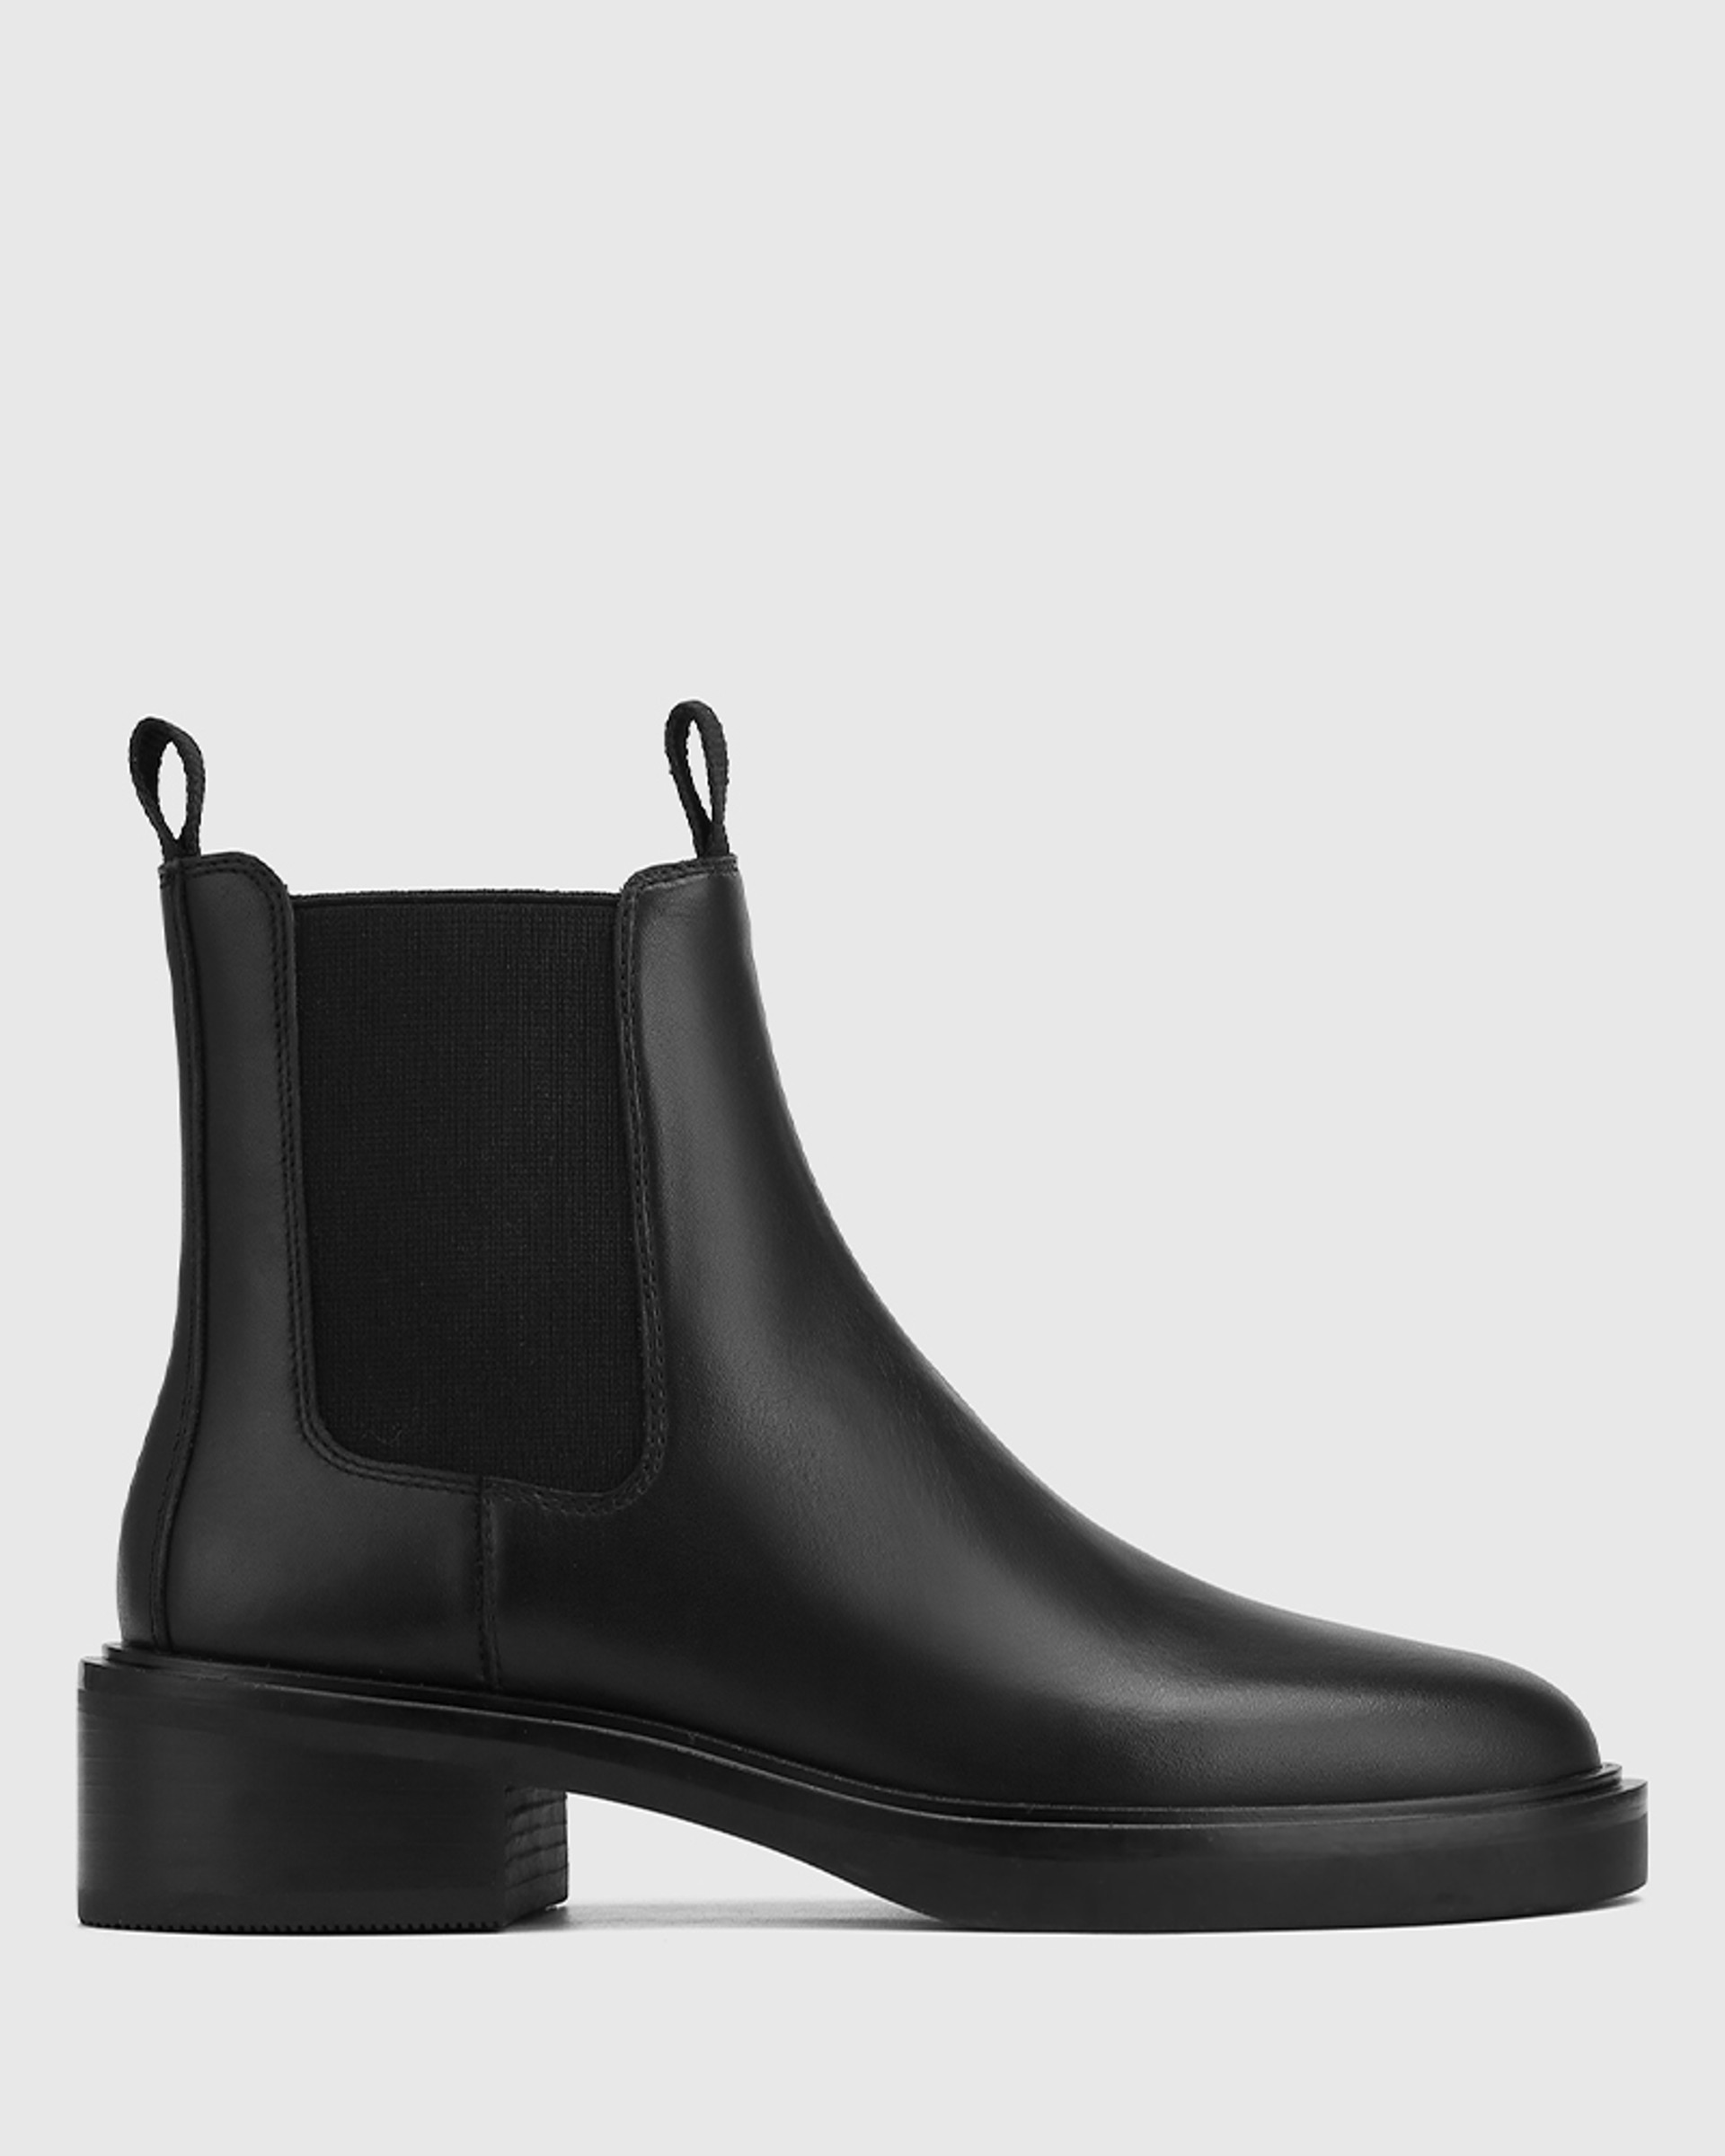 Gina Black Leather Ankle Boot